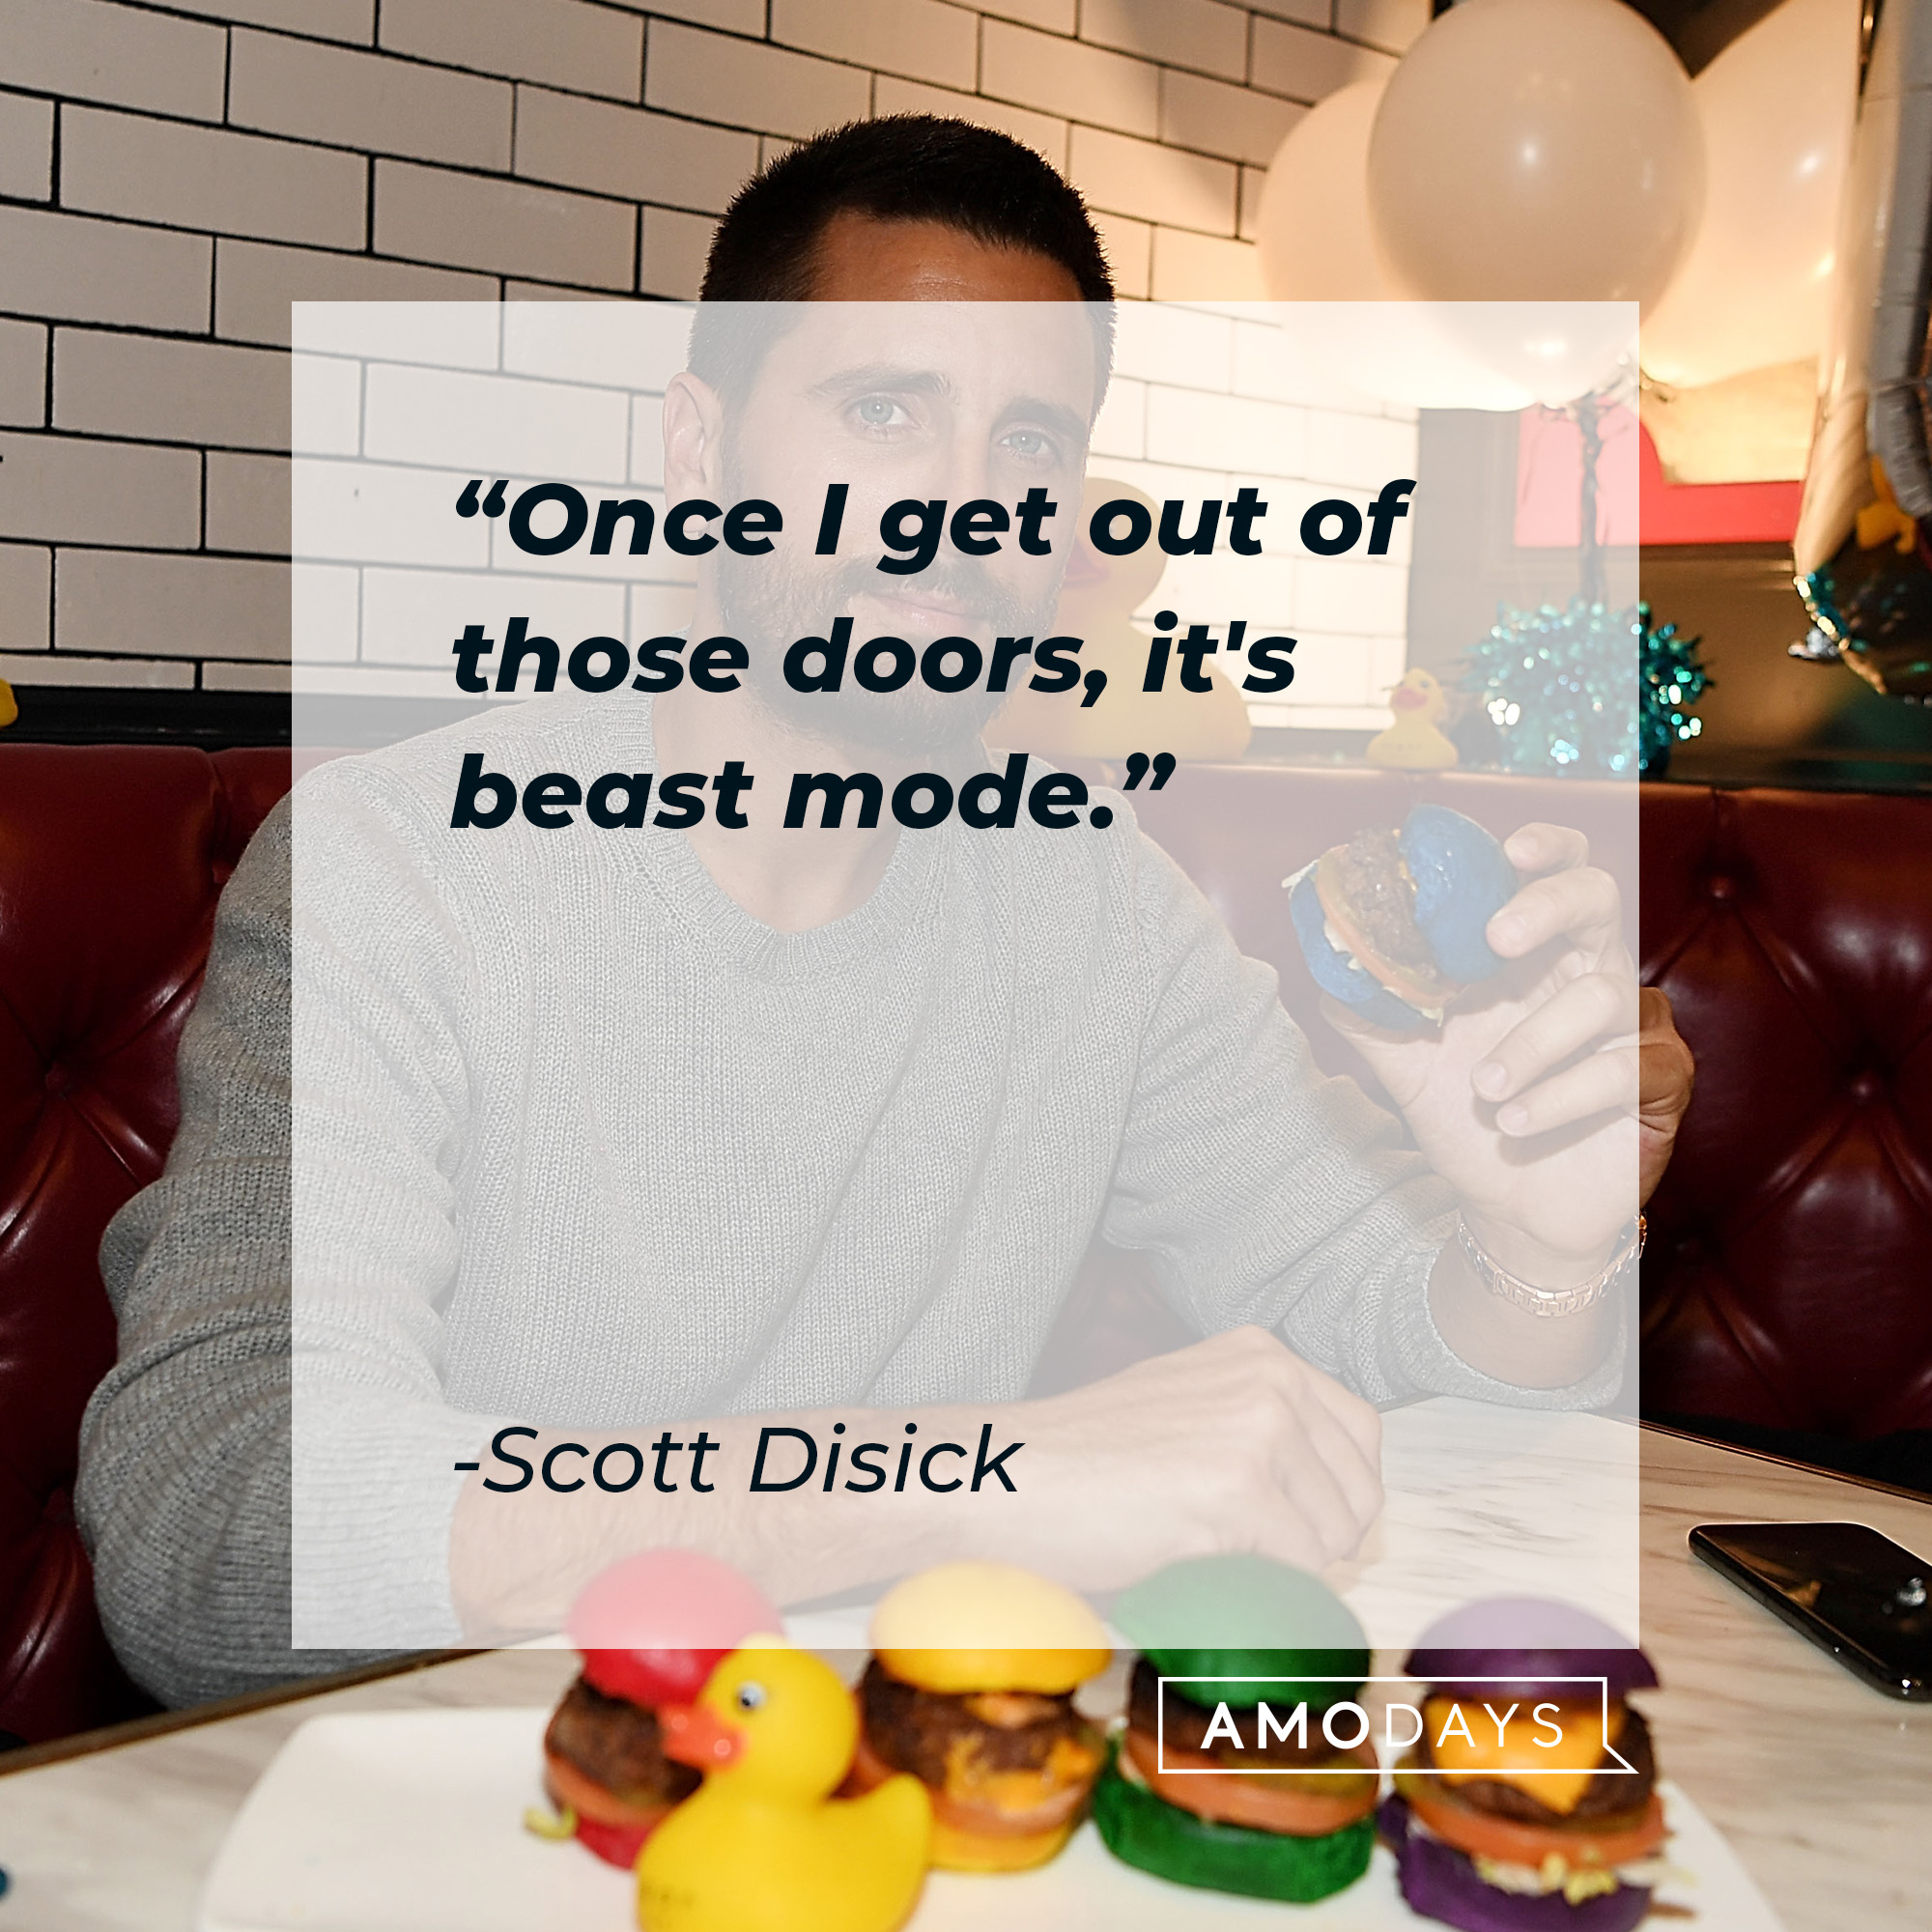 Scott Disick quote: "Once I get out of those doors, it's beast mode." | Source: Getty Images